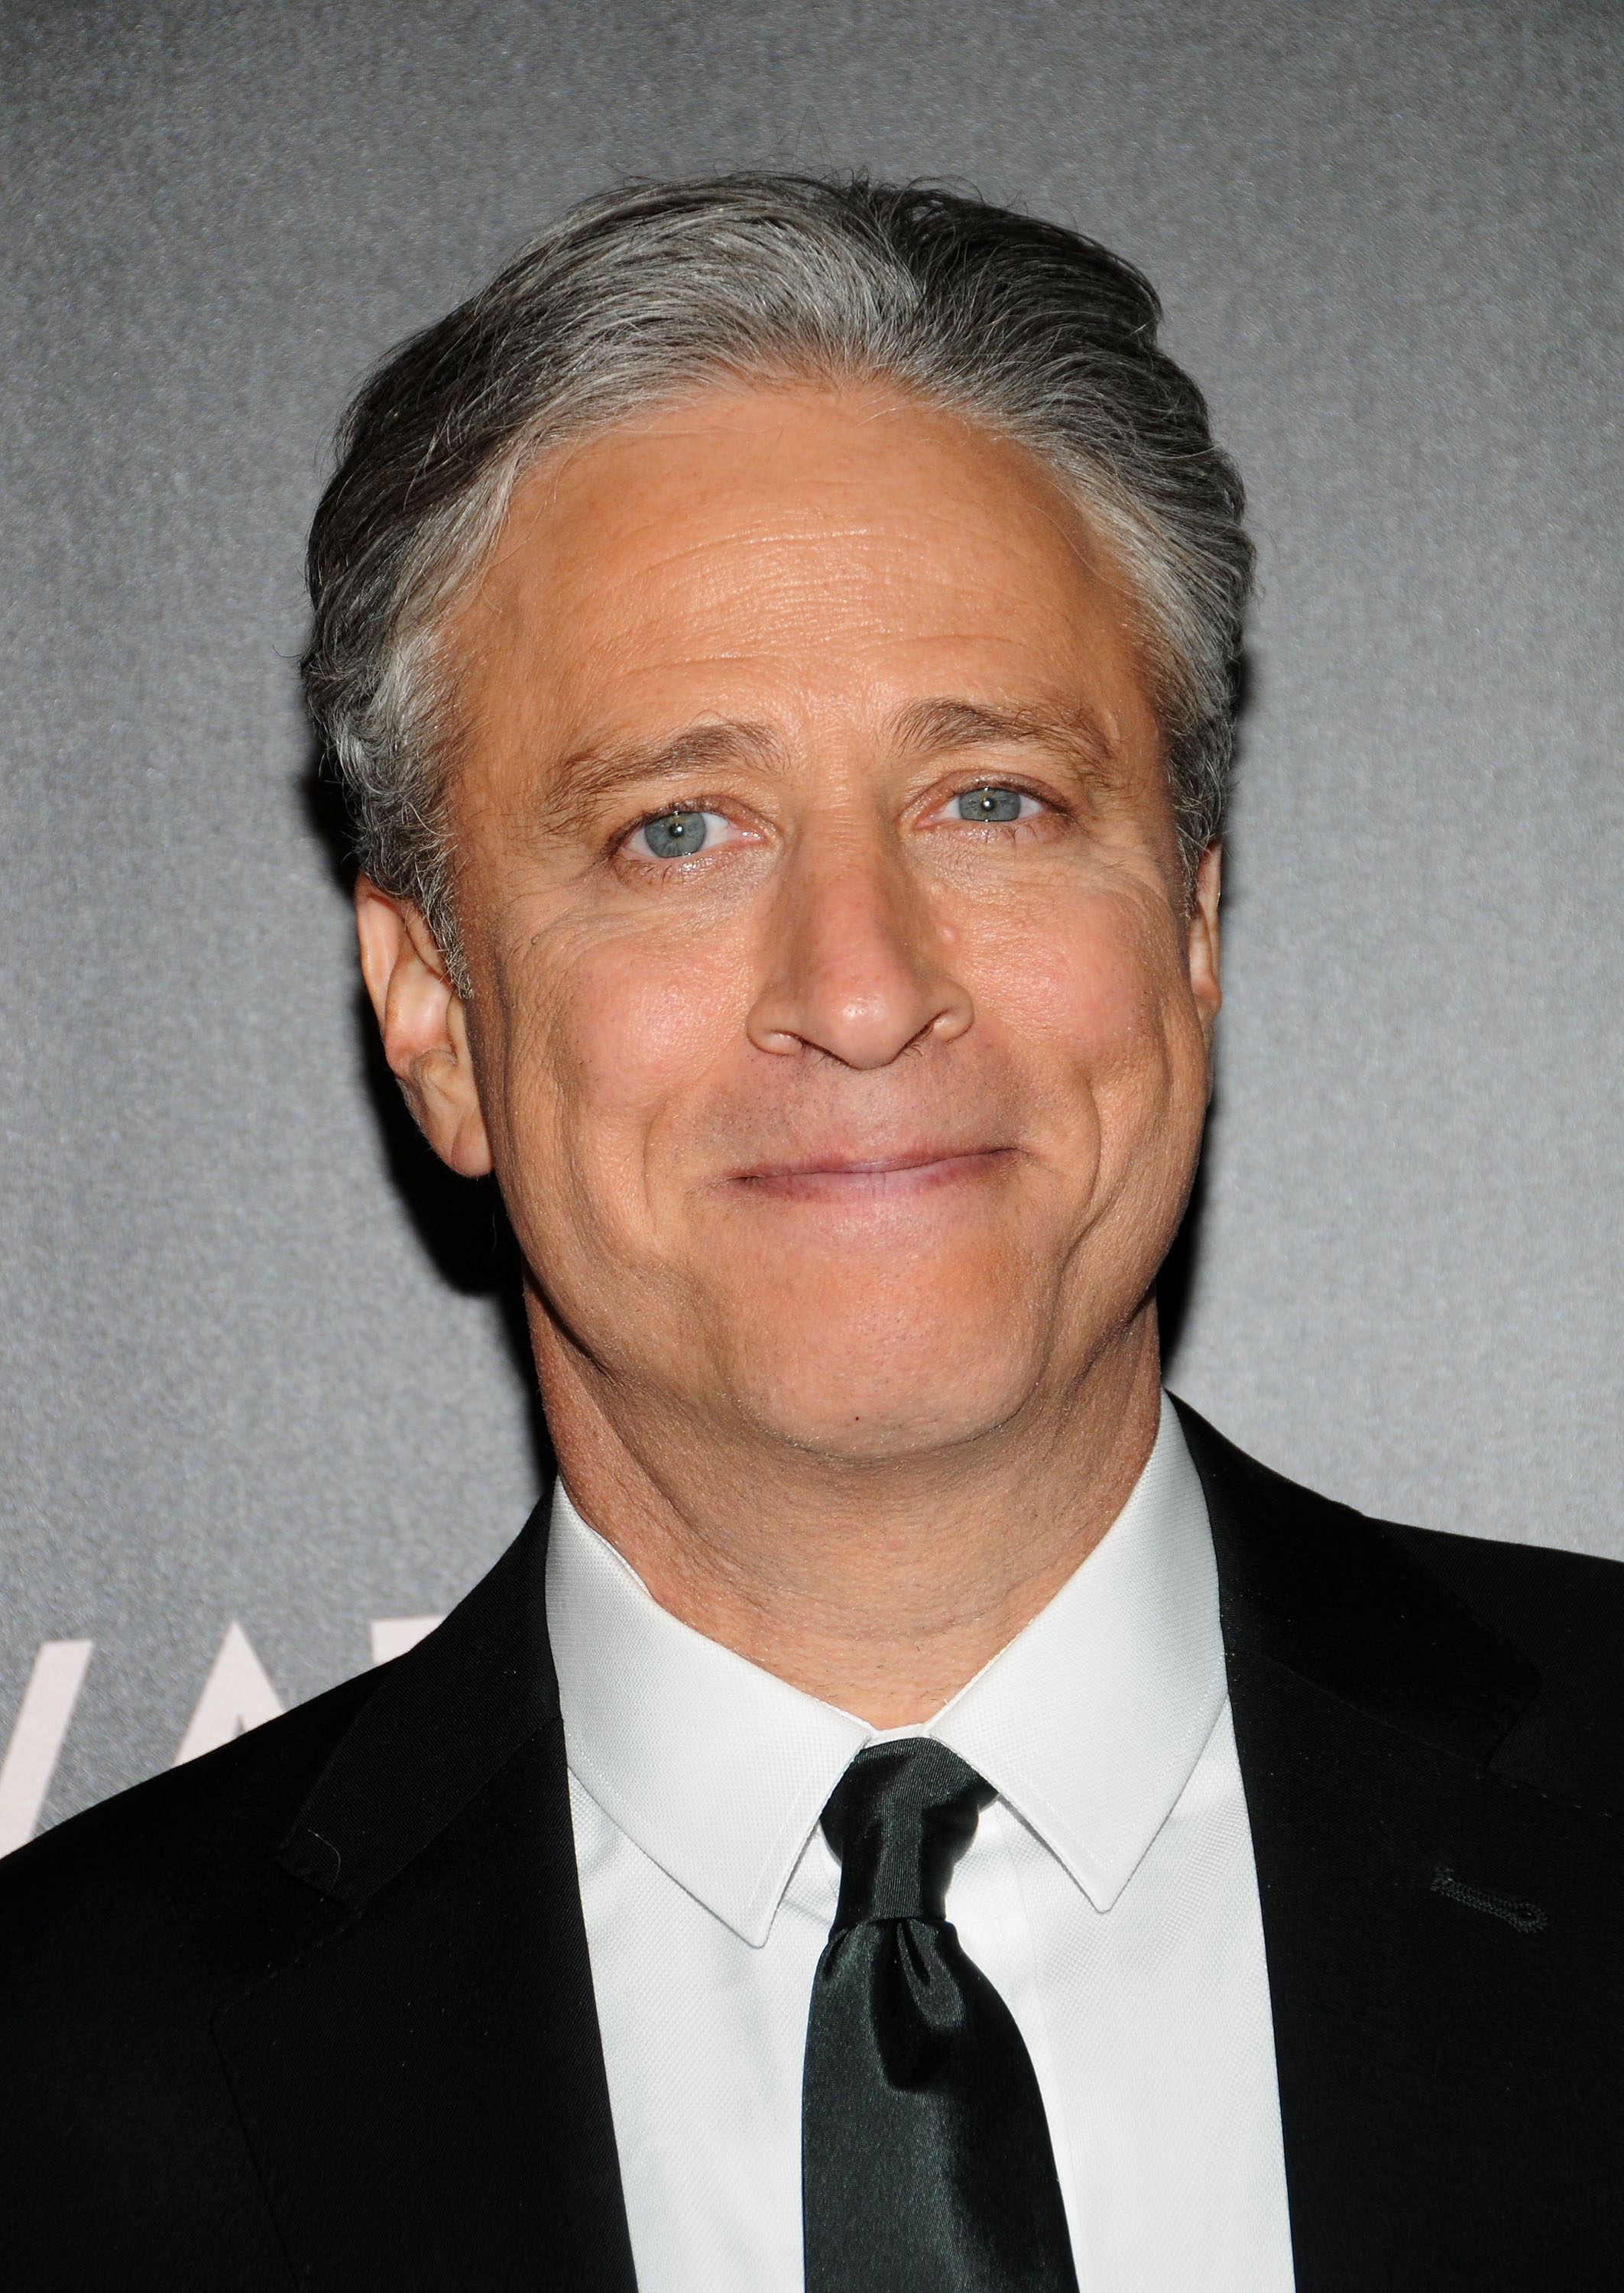 Director/writer/producer Jon Stewart attends "Rosewater" New York Premiere at AMC Lincoln Square Theater on November 12, 2014 in New York City